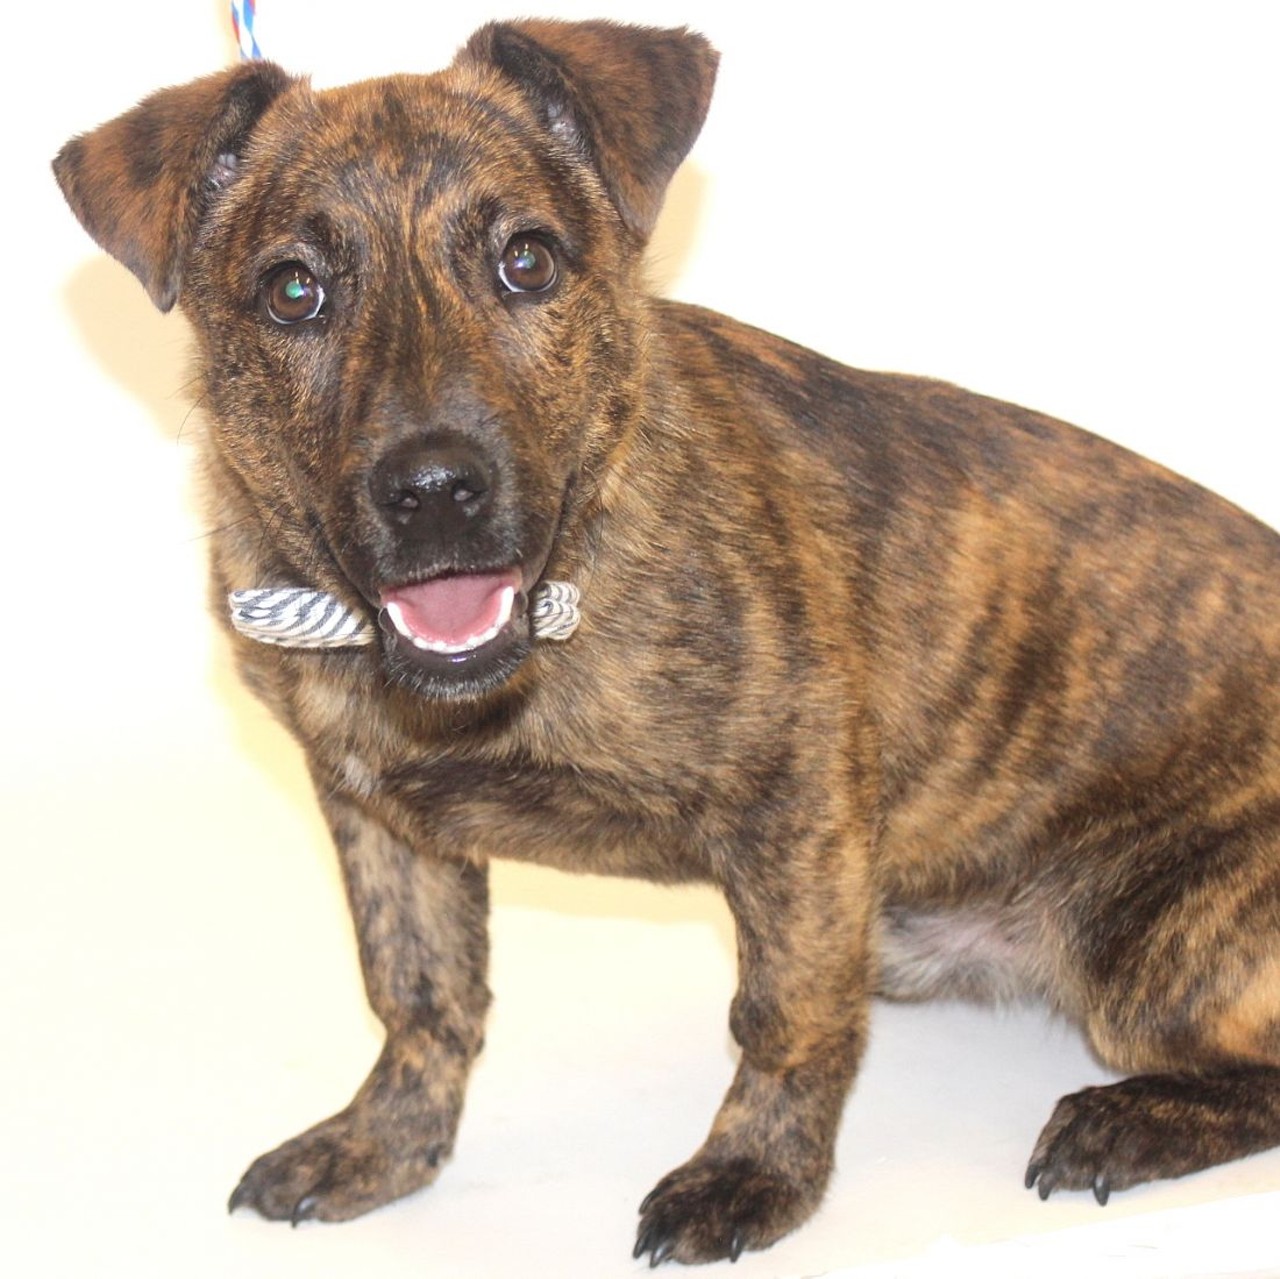 NAME: Tiger Tim 
GENDER: Male 
BREED: Labrador-Dachshund mix 
AGE: 8 months 
WEIGHT: 24 pounds
SPECIAL CONSIDERATIONS: Tiger Tim prefers to be your only dog.
REASON I CAME TO MHS: Agency transfer 
LOCATION: Mackey Center for Animal Care in Detroit 
ID NUMBER: 866276 